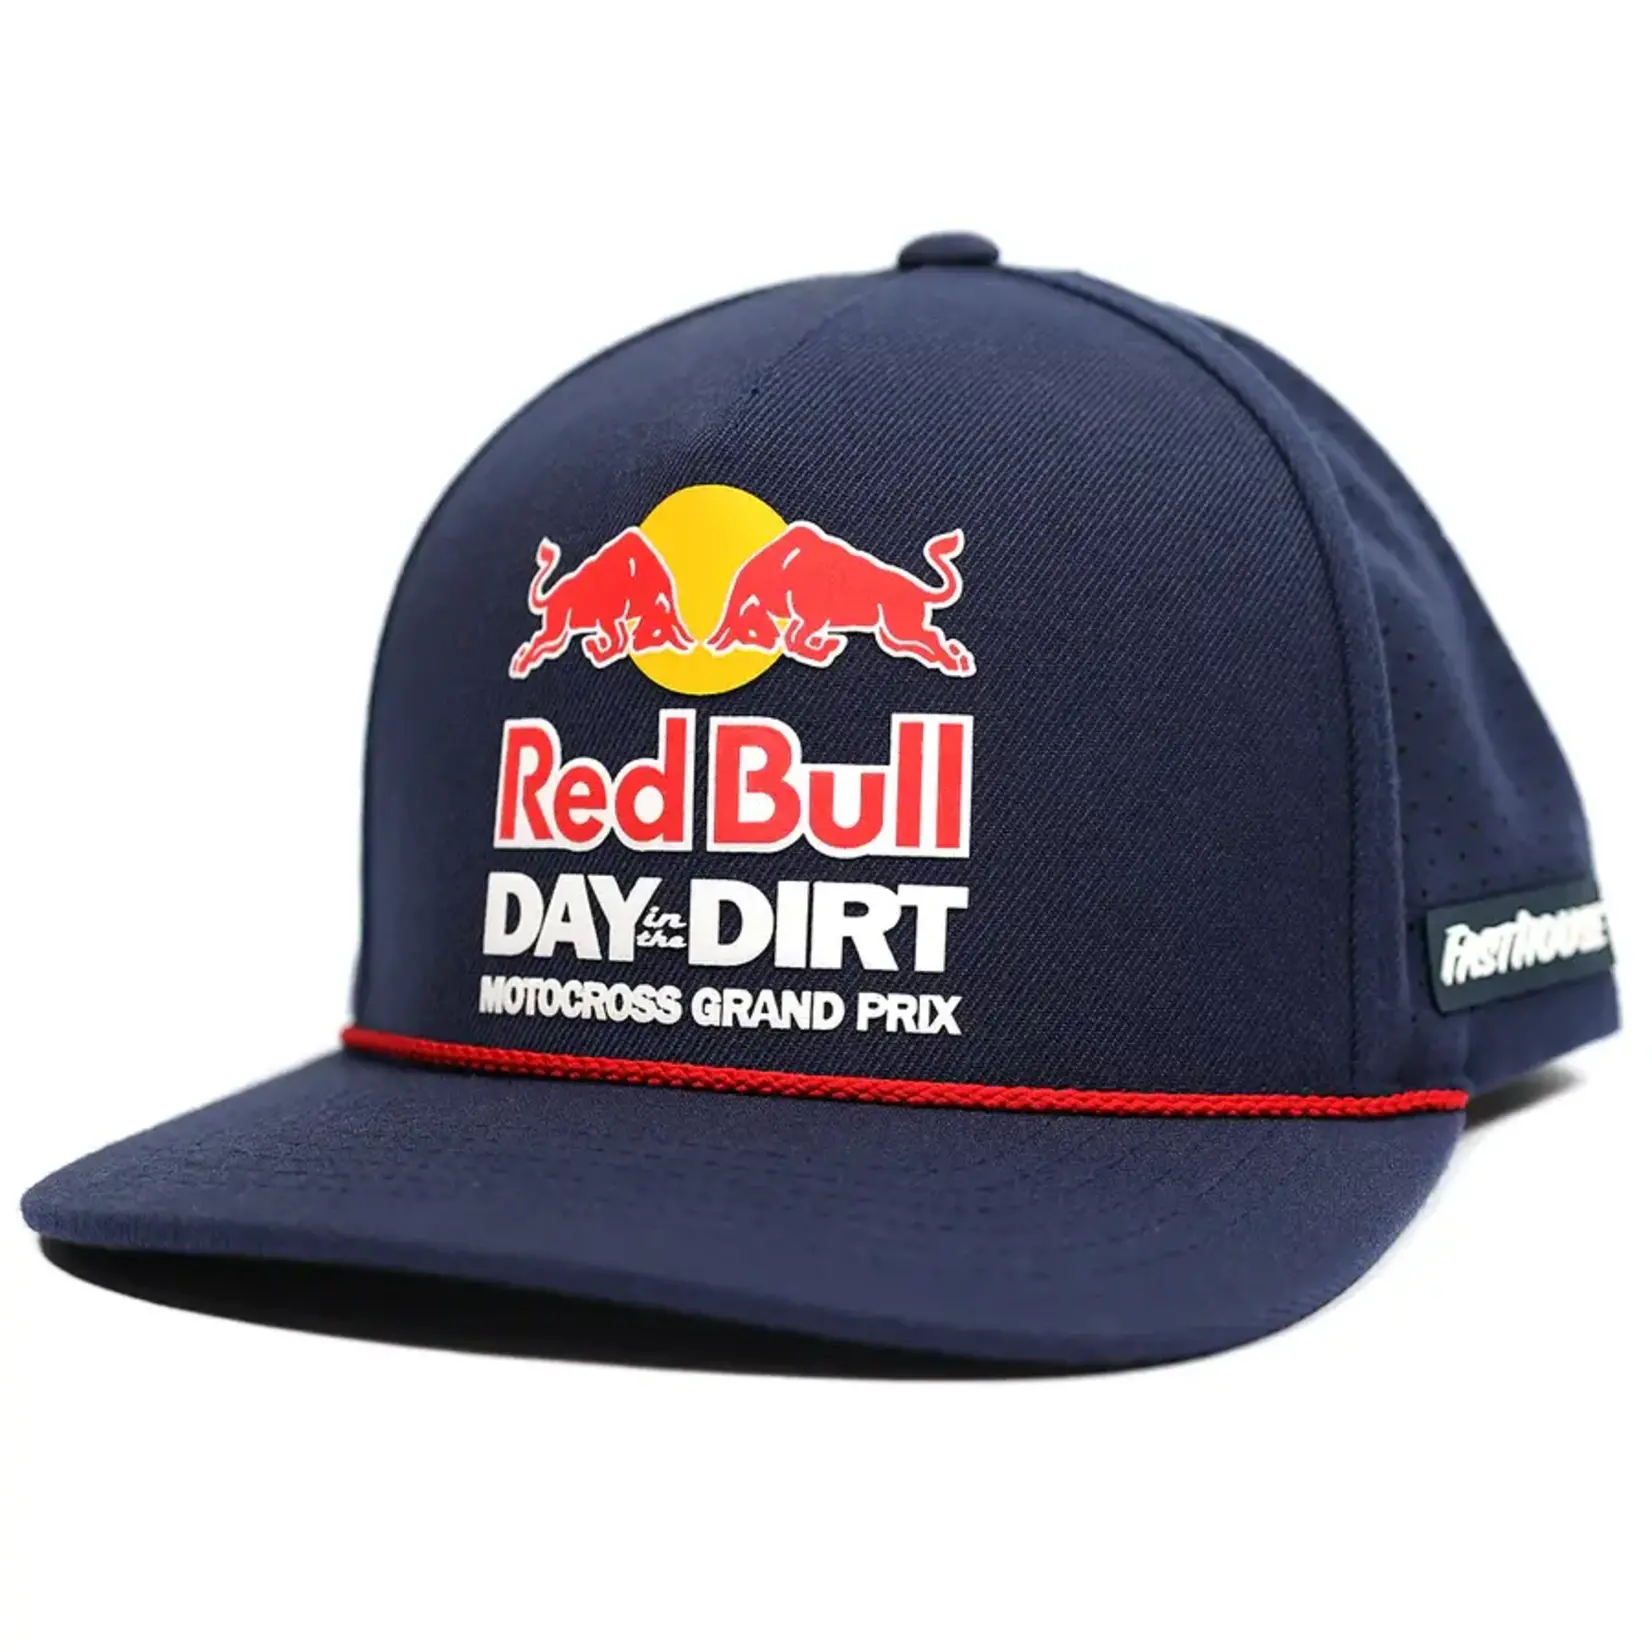 FASTHOUSE REDBULL DINTD HAT NAVY